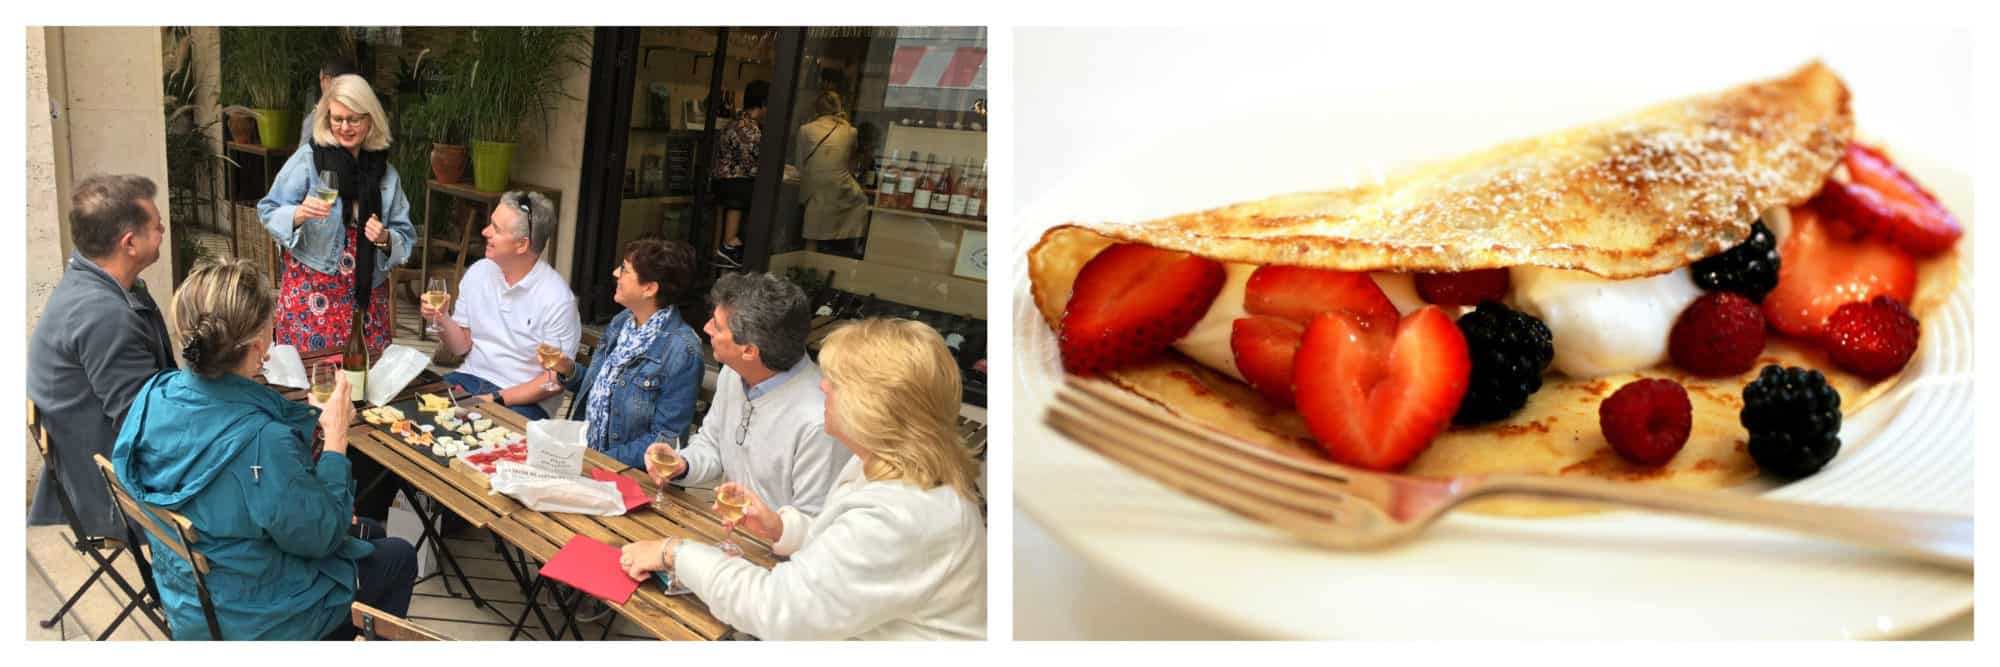 On left: Lisa Rankin, founder of the food tour company Flavors of Paris, leads a guided visit on wine, cheese, and charcuterie at a local Paris restaurant. On right: An overflowing, golden, crispy crêpe is stuffed with whipped cream. strawberries, raspberries, and blackberries. 